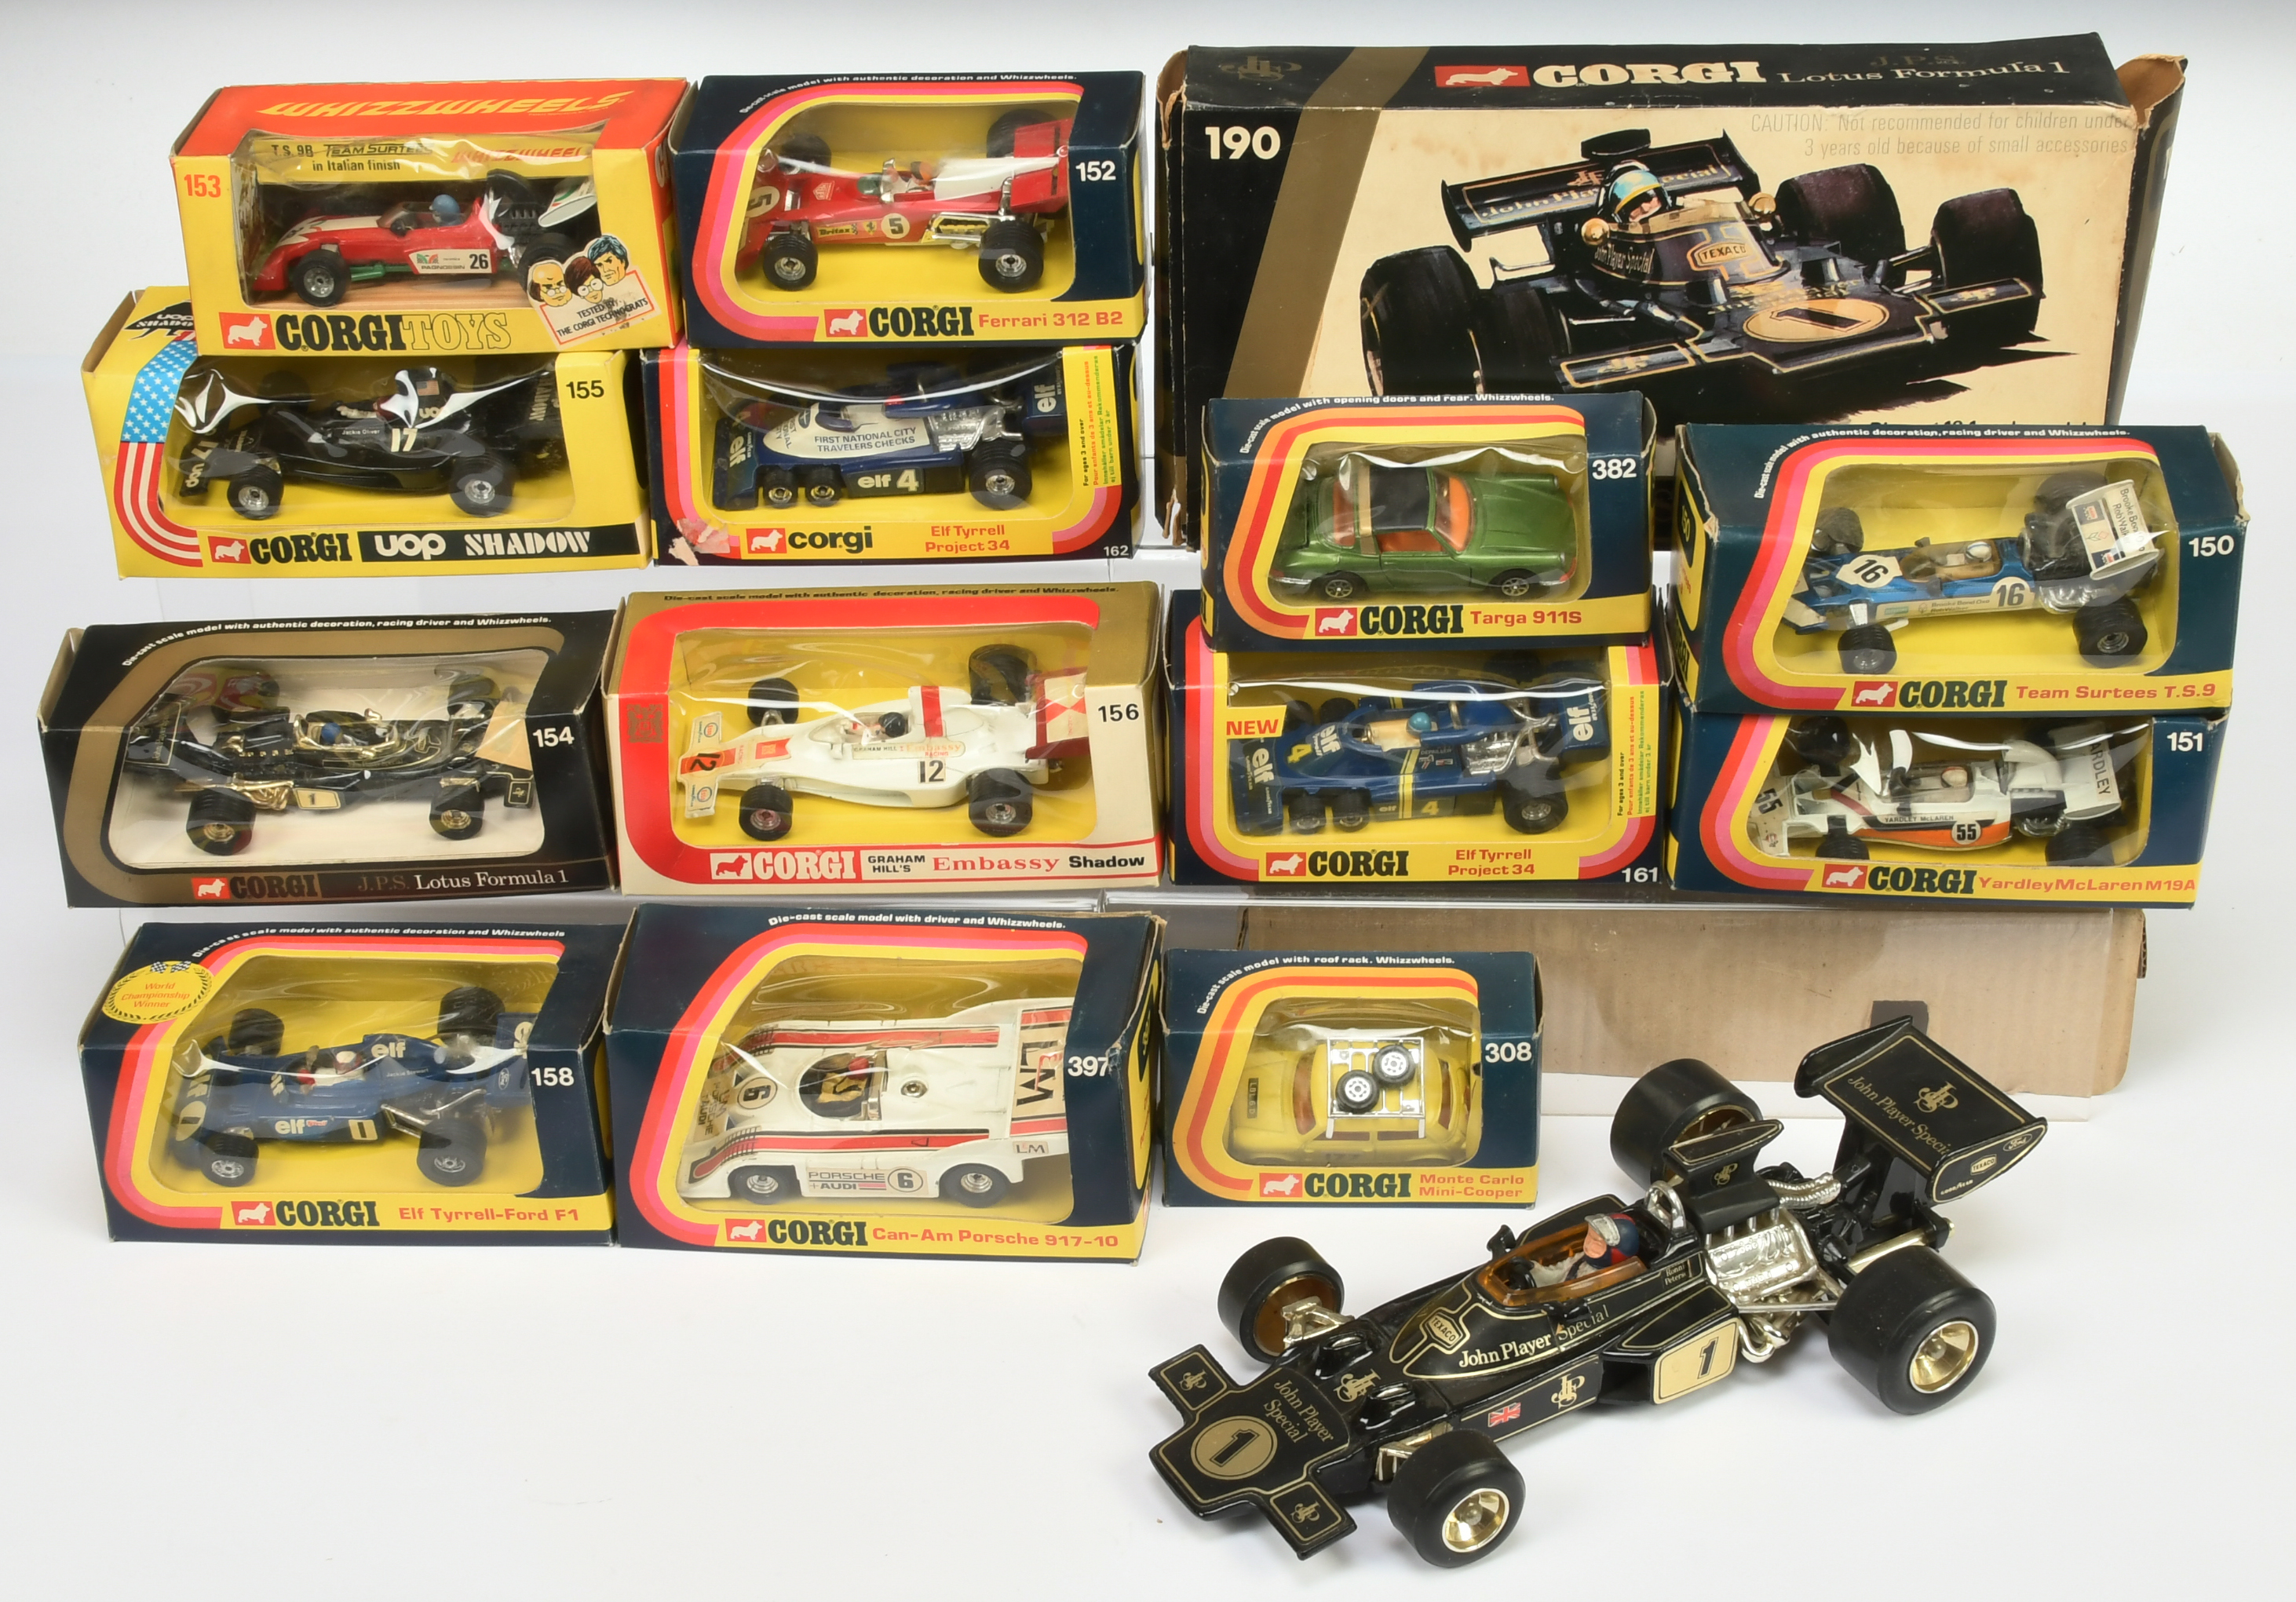 Corgi toys Group Of (1/36th) Racing Cars To include 150 Team surtees, 156 "Embassy" Shadow, 162 "...